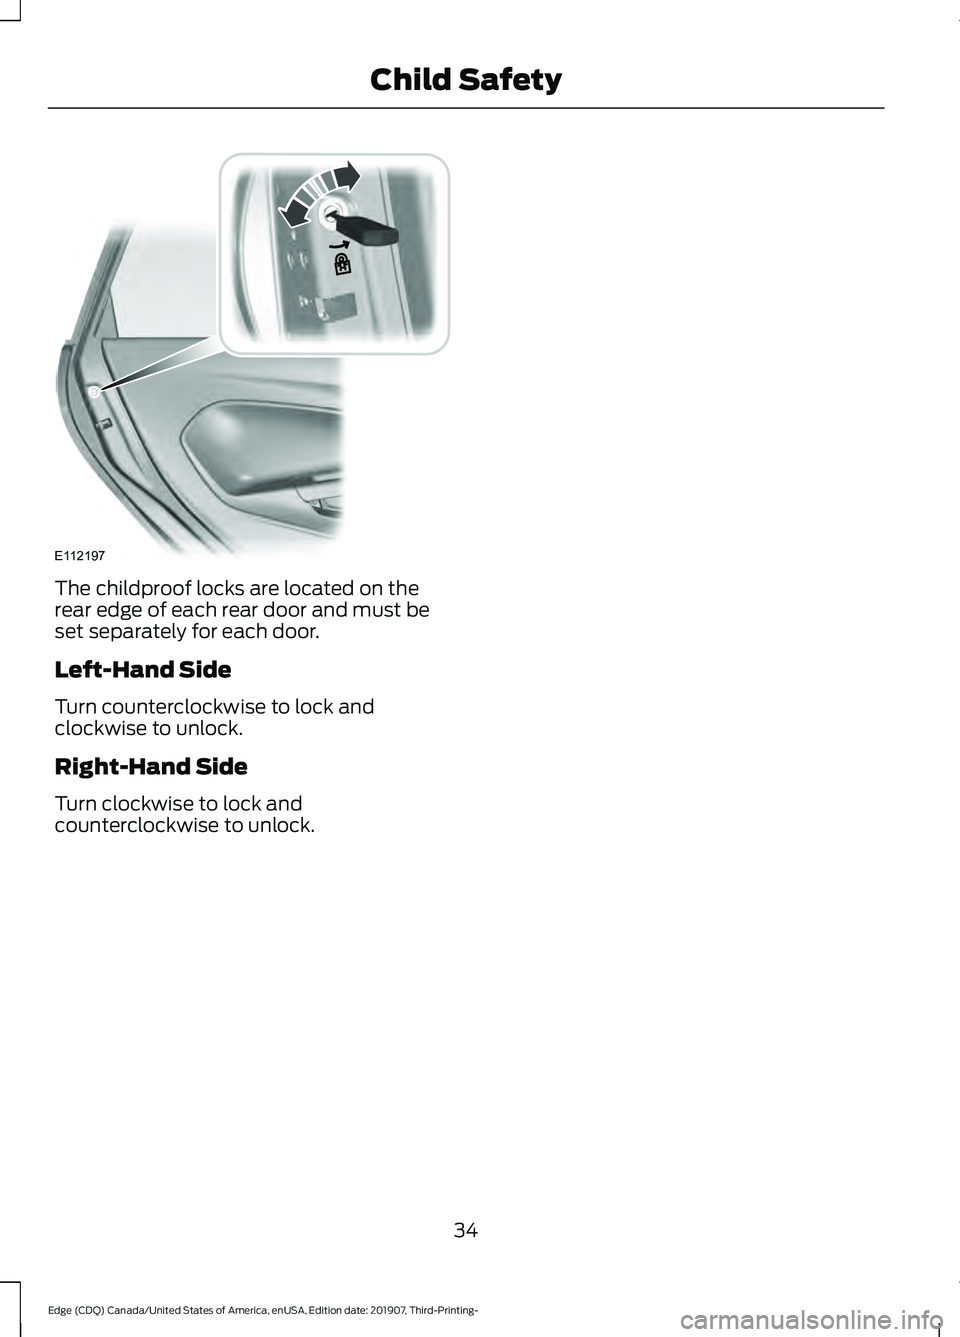 FORD EDGE 2020  Owners Manual The childproof locks are located on the
rear edge of each rear door and must be
set separately for each door.
Left-Hand Side
Turn counterclockwise to lock and
clockwise to unlock.
Right-Hand Side
Turn